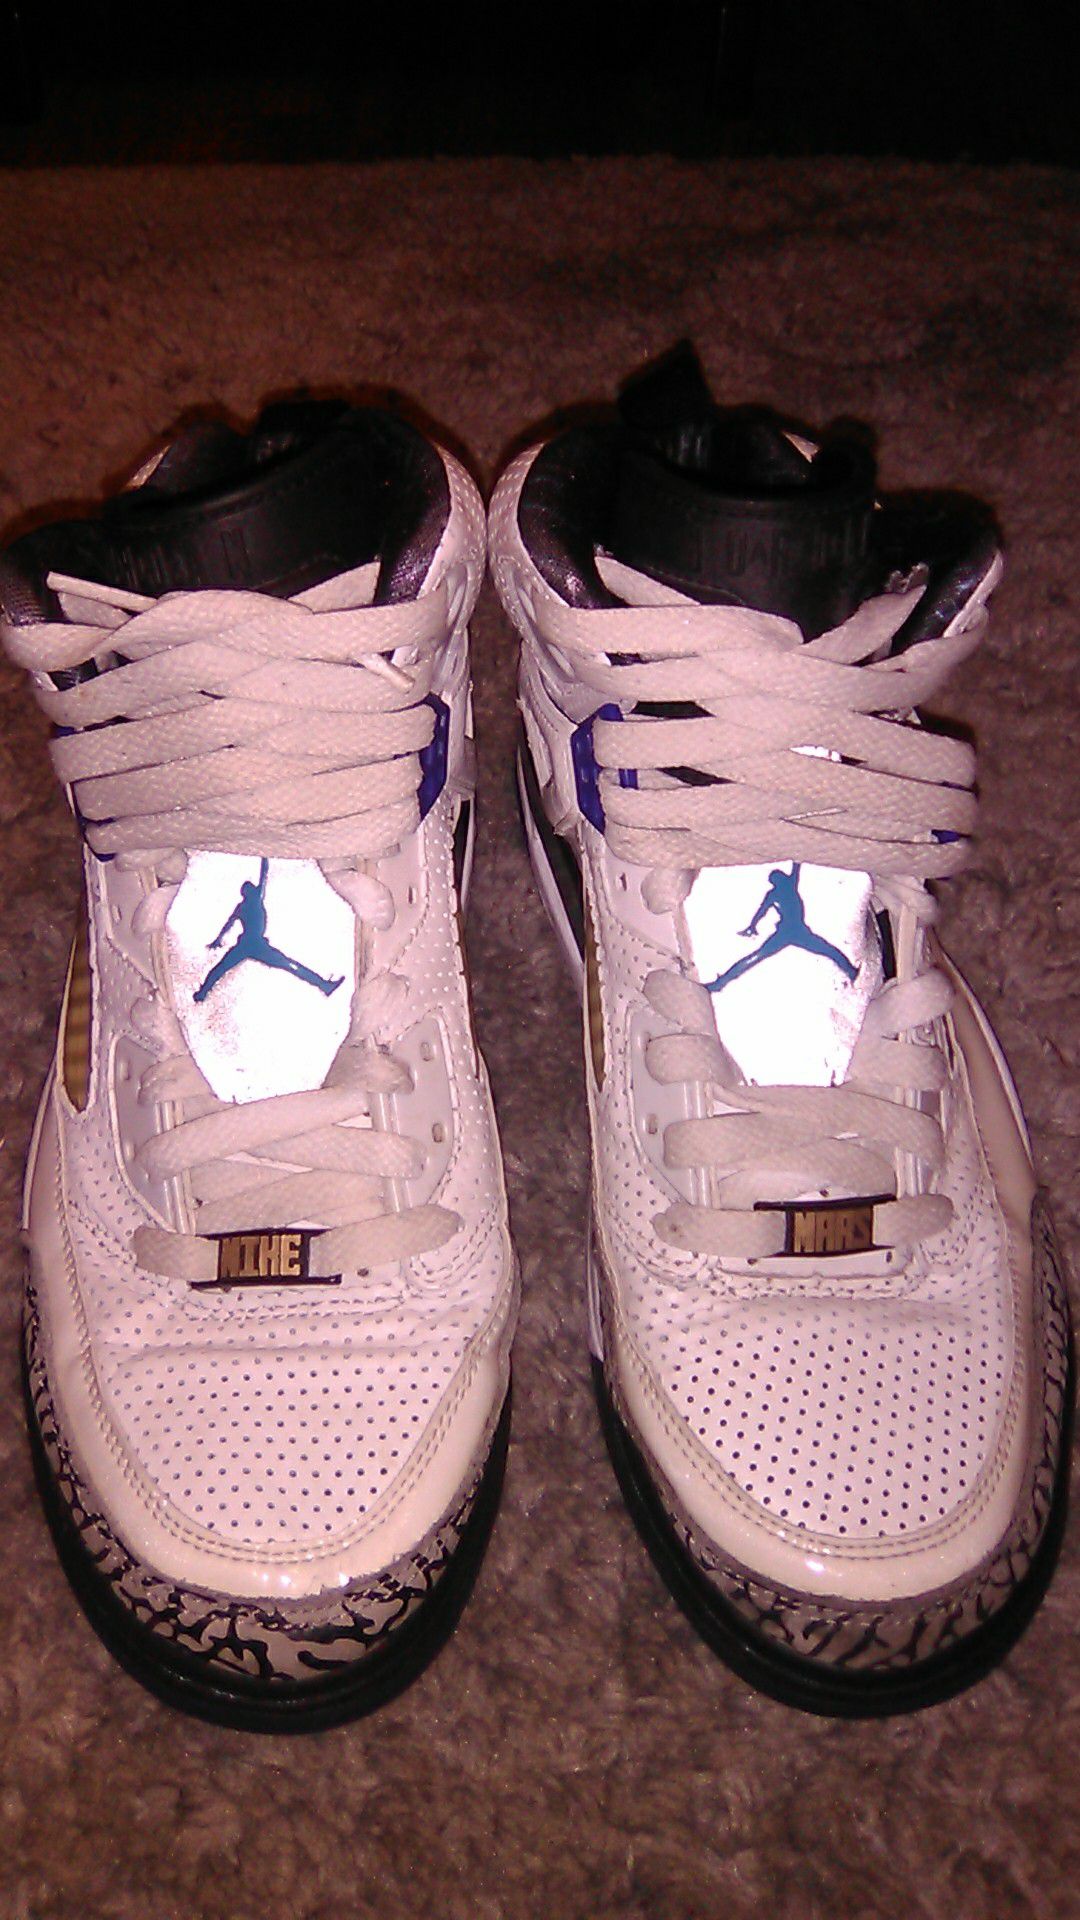 Jordan Mike Mars edition size 7.5. A tiny bit of cracking on the left shoe see pictures.